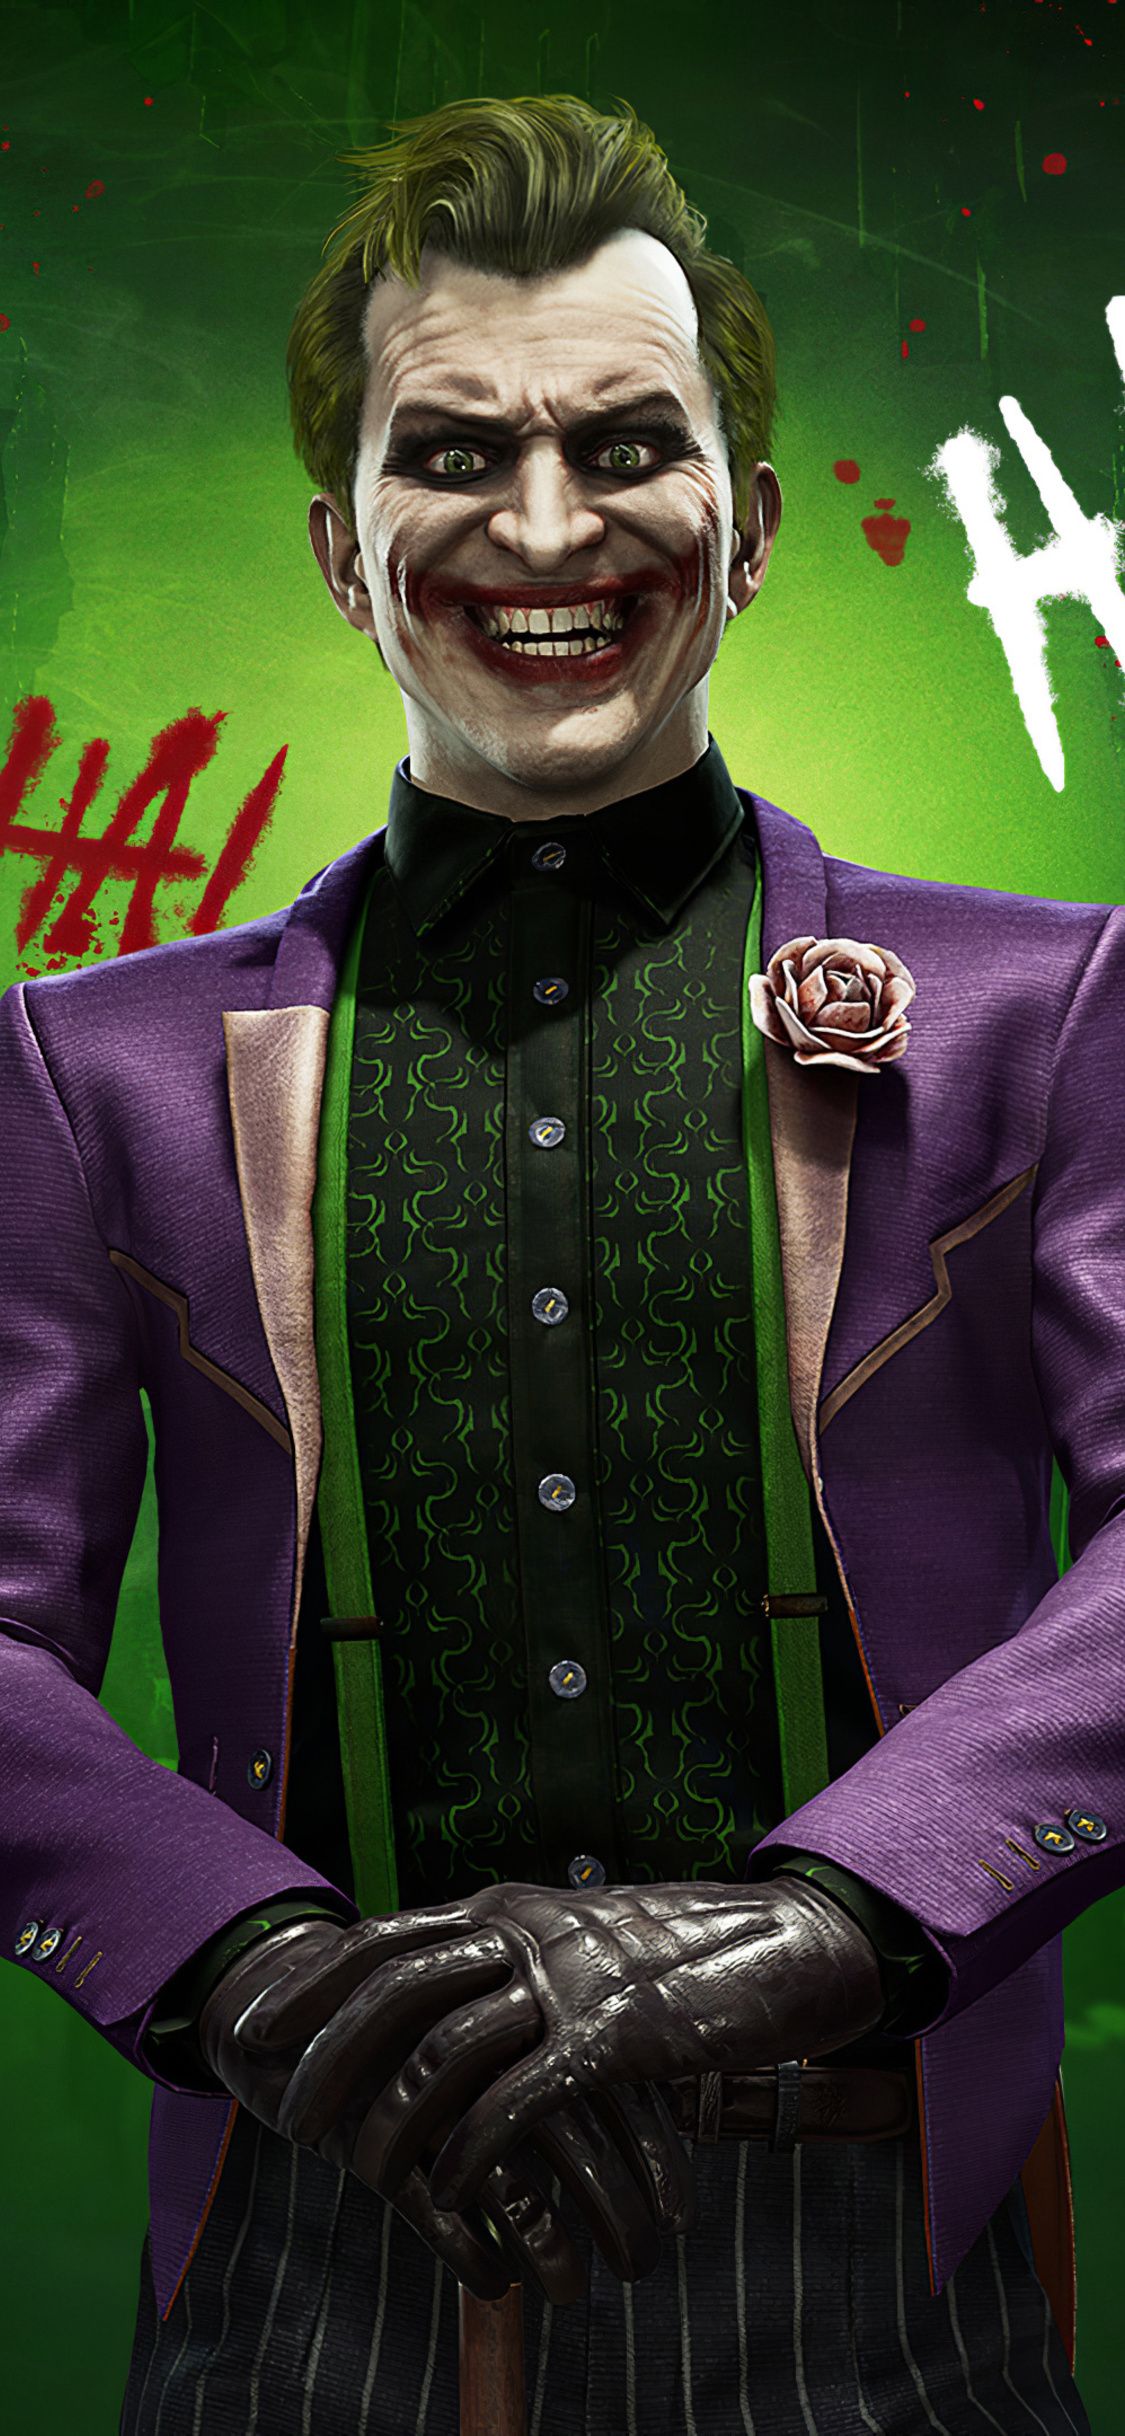 The Joker Mortal Kombat 11 iPhone XS, iPhone iPhone X HD 4k Wallpaper, Image, Background, Photo and Picture